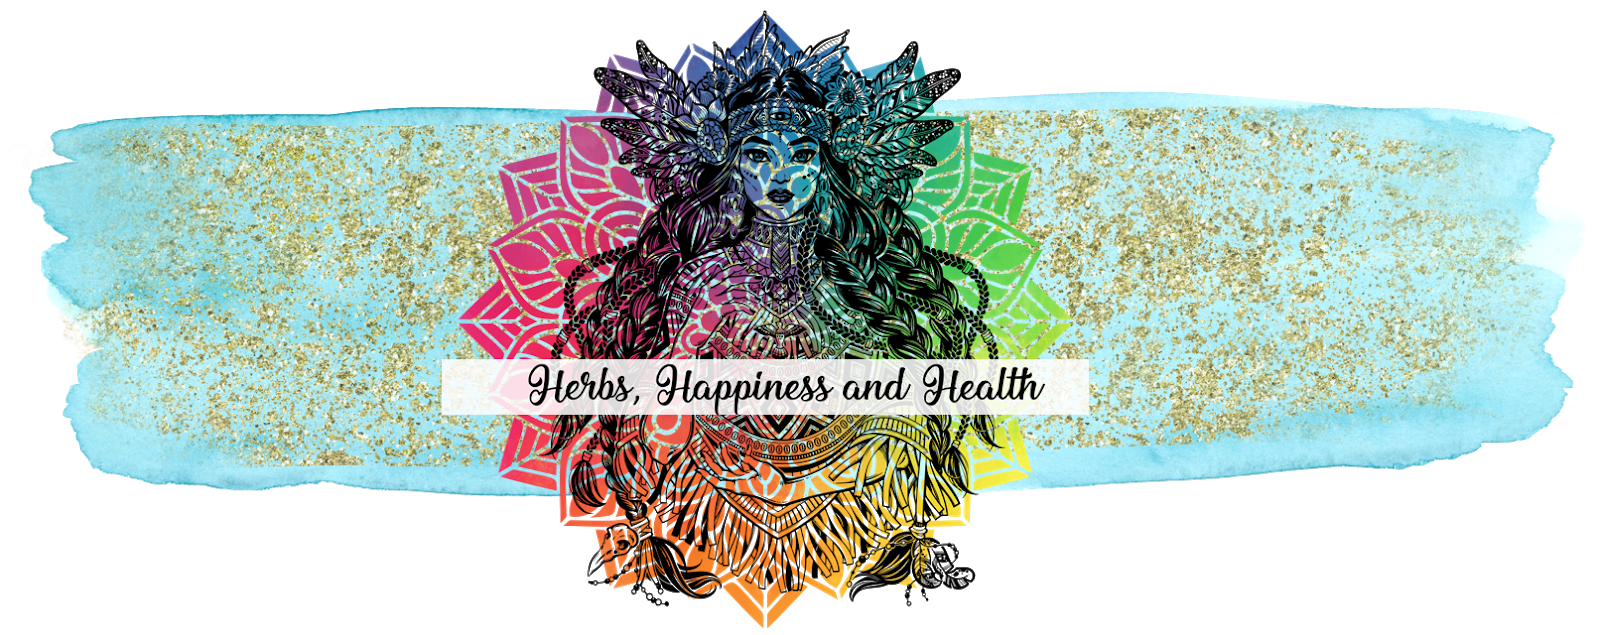 Herbs Happiness and Health